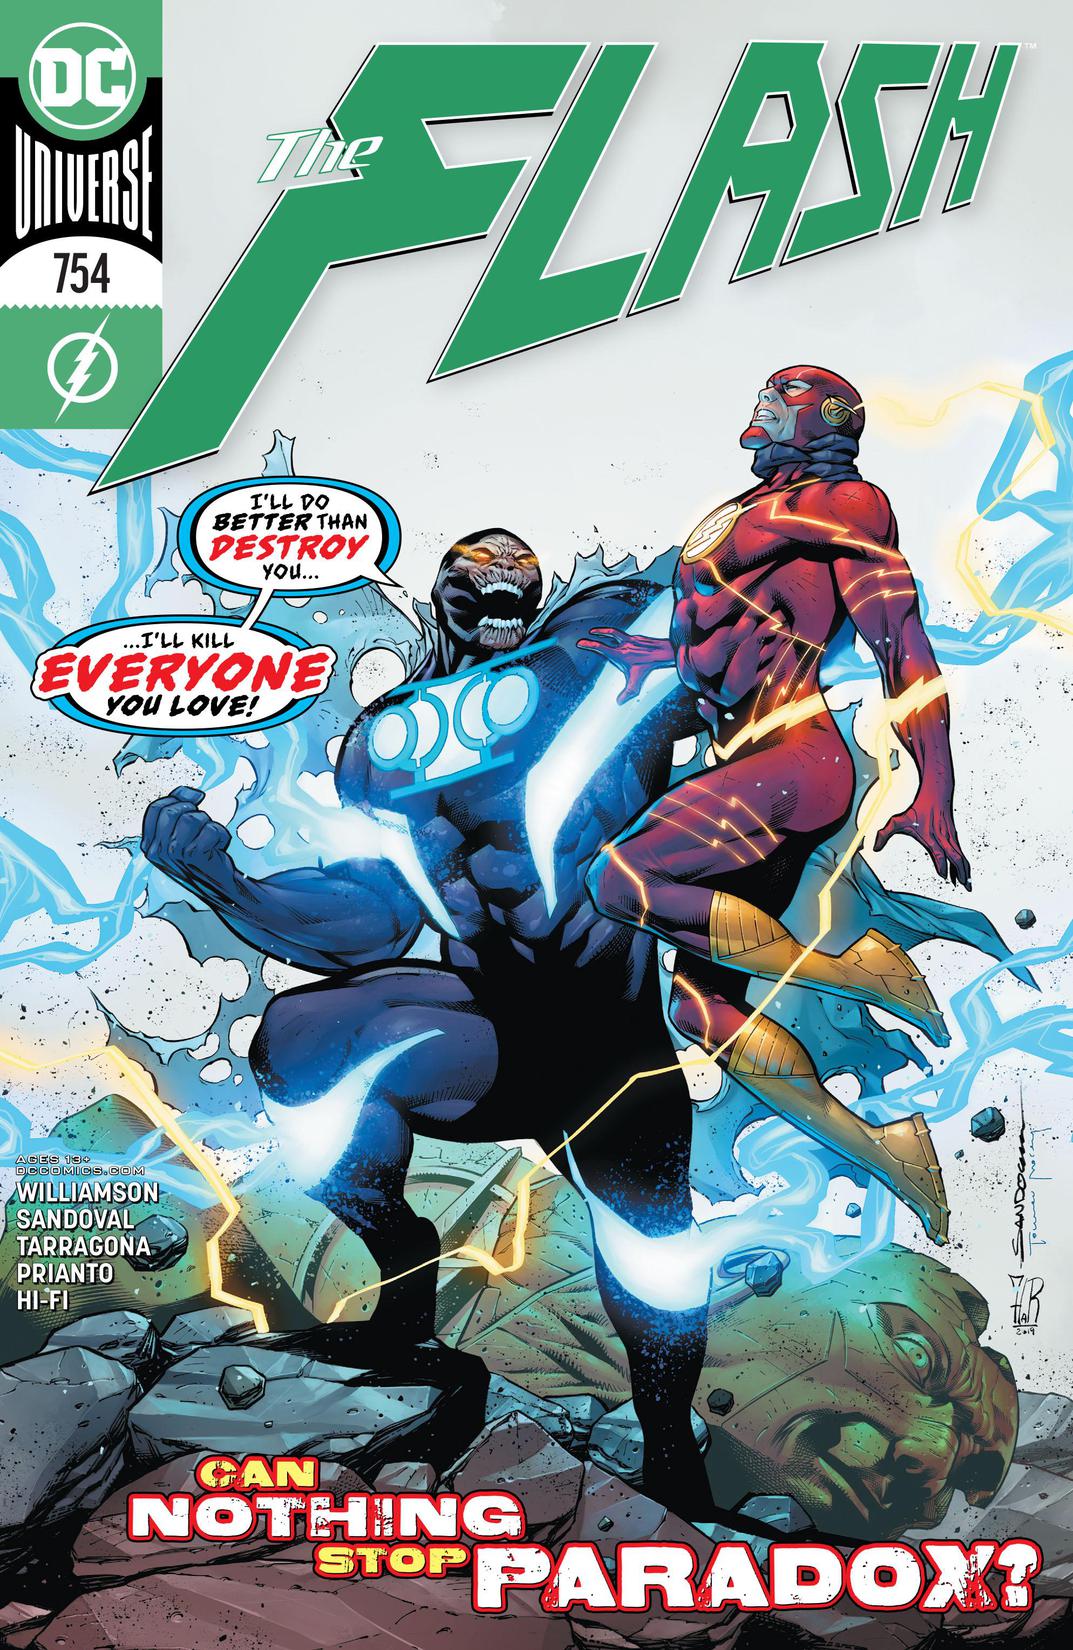 The Flash (2016-) #754 preview images